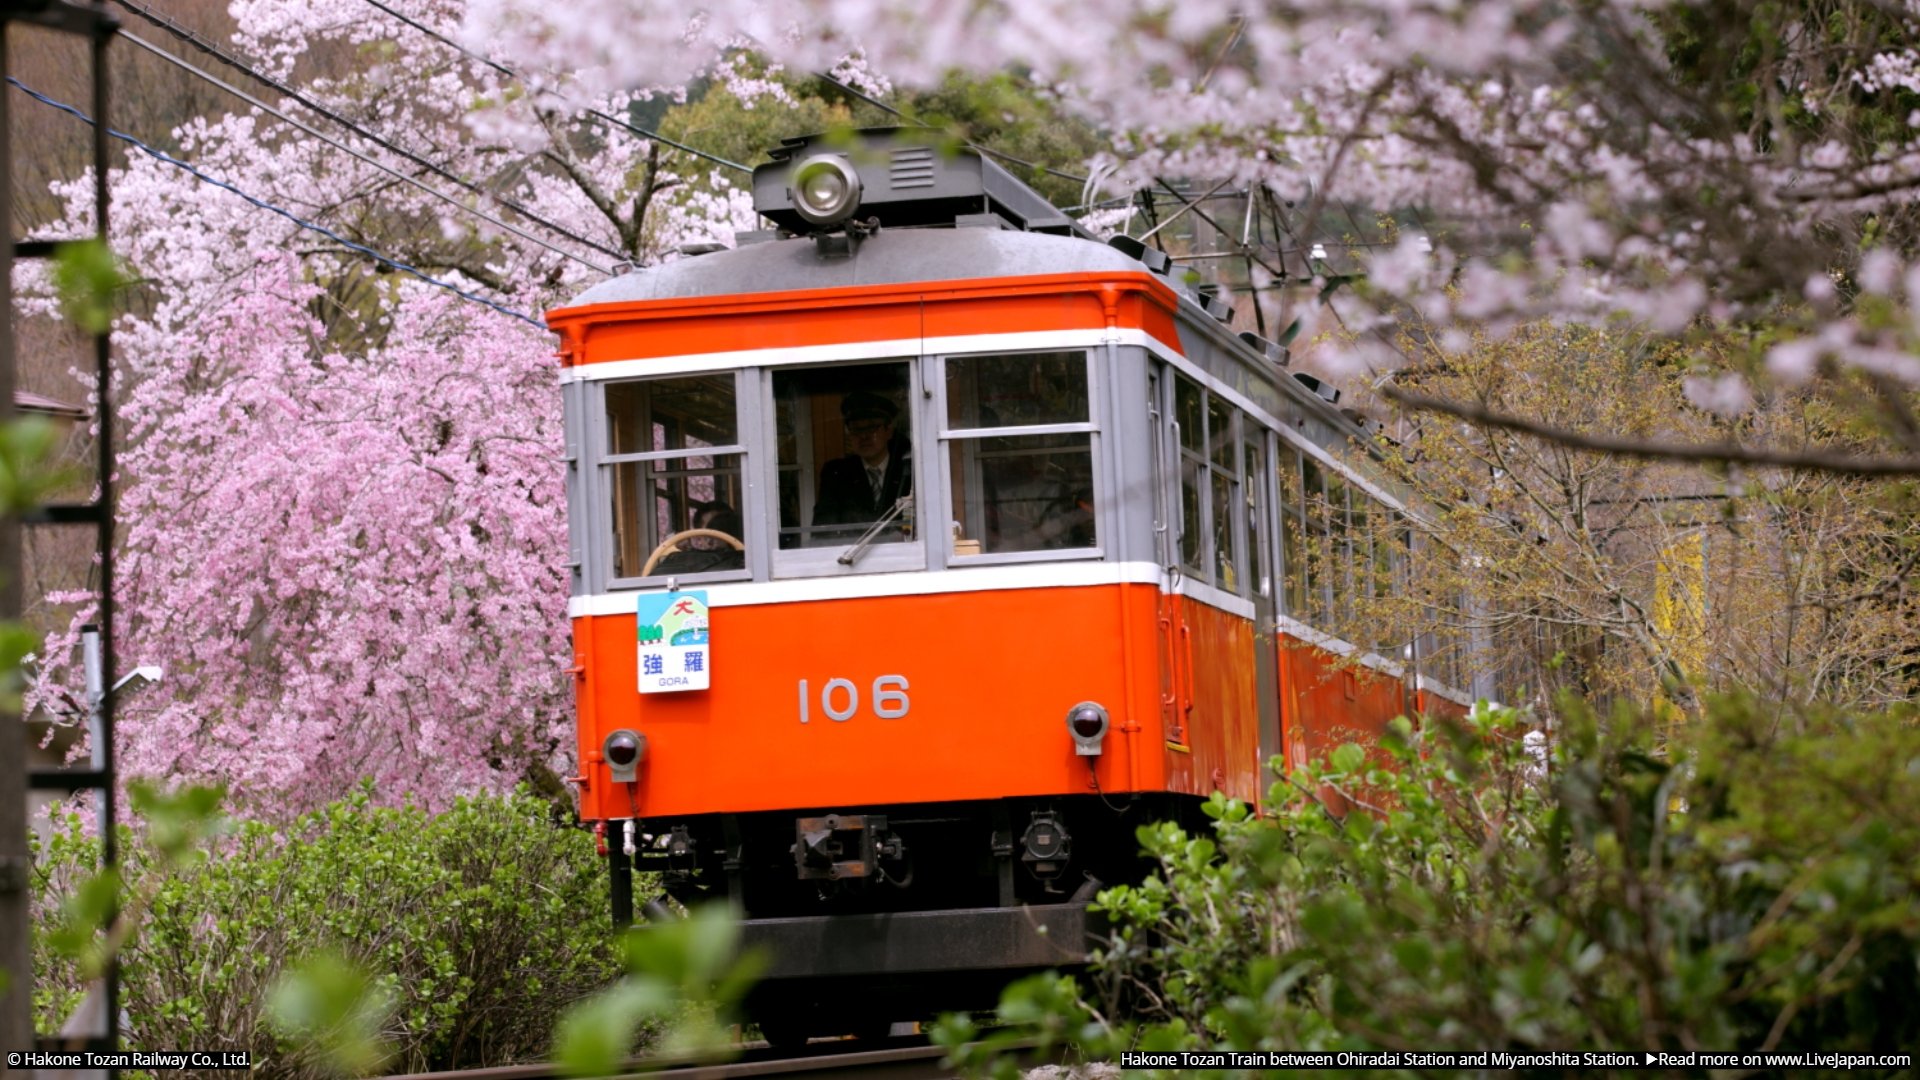 These 20 Incredible Photo of Japan's Trains Will Make You Famous on Video Chat!. LIVE JAPAN travel guide